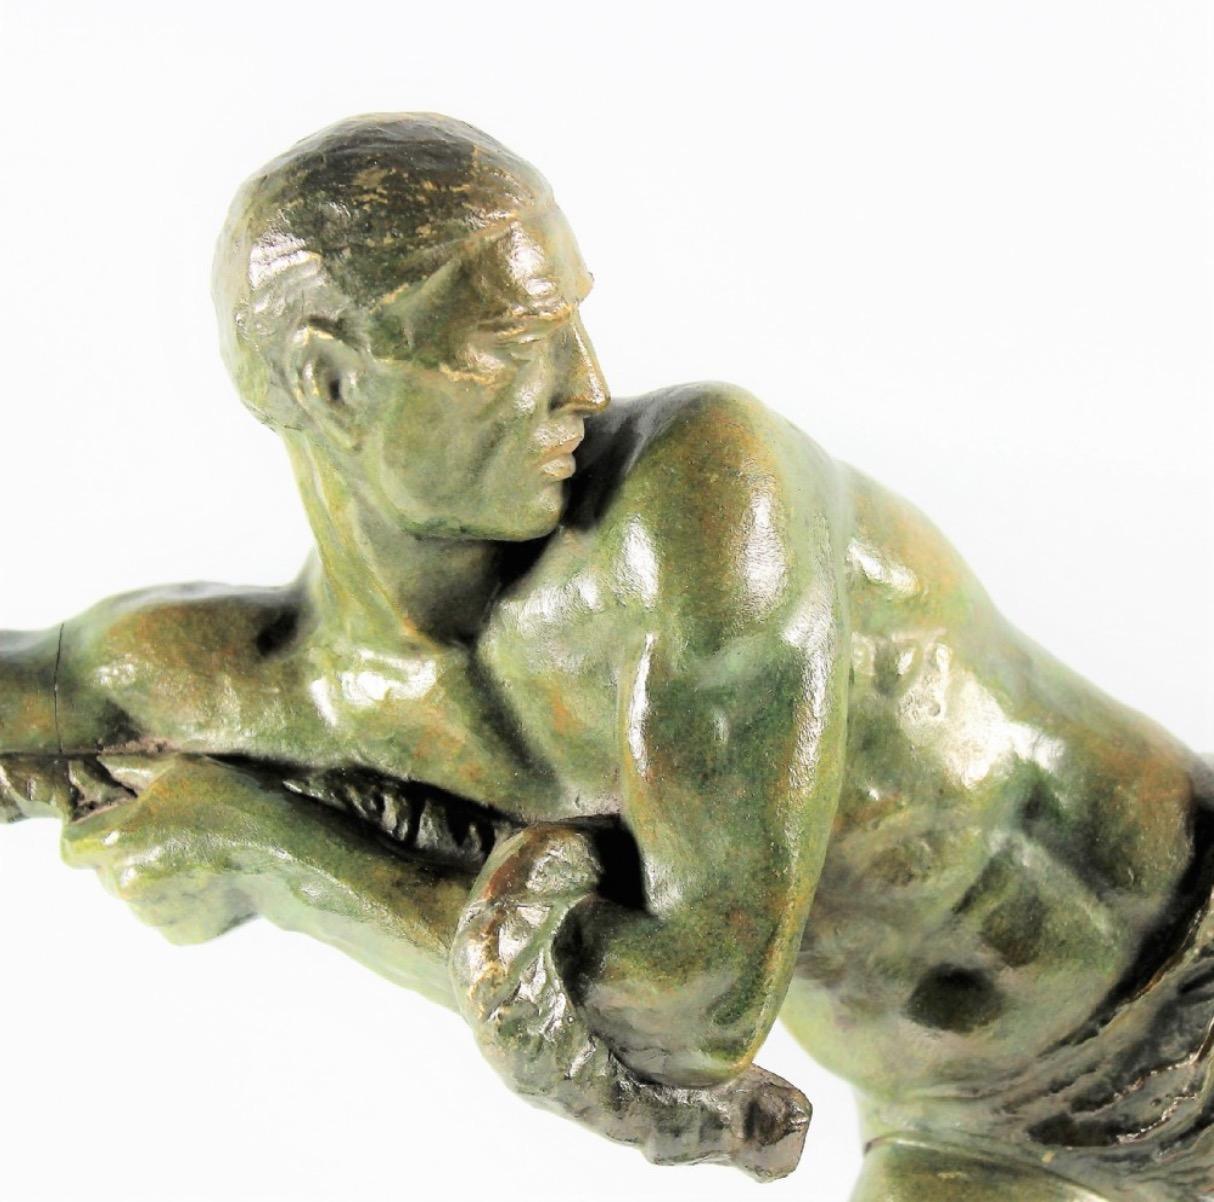 Art Deco sculpture by Pierre Le Faguays “Lariat” Bronze. Very large and rare male figure in cold painted green patinated bronze finish of male throwing a rope, mounted on a bronze wedge shaped base. Tremendous details, unusual texture portrayed in a